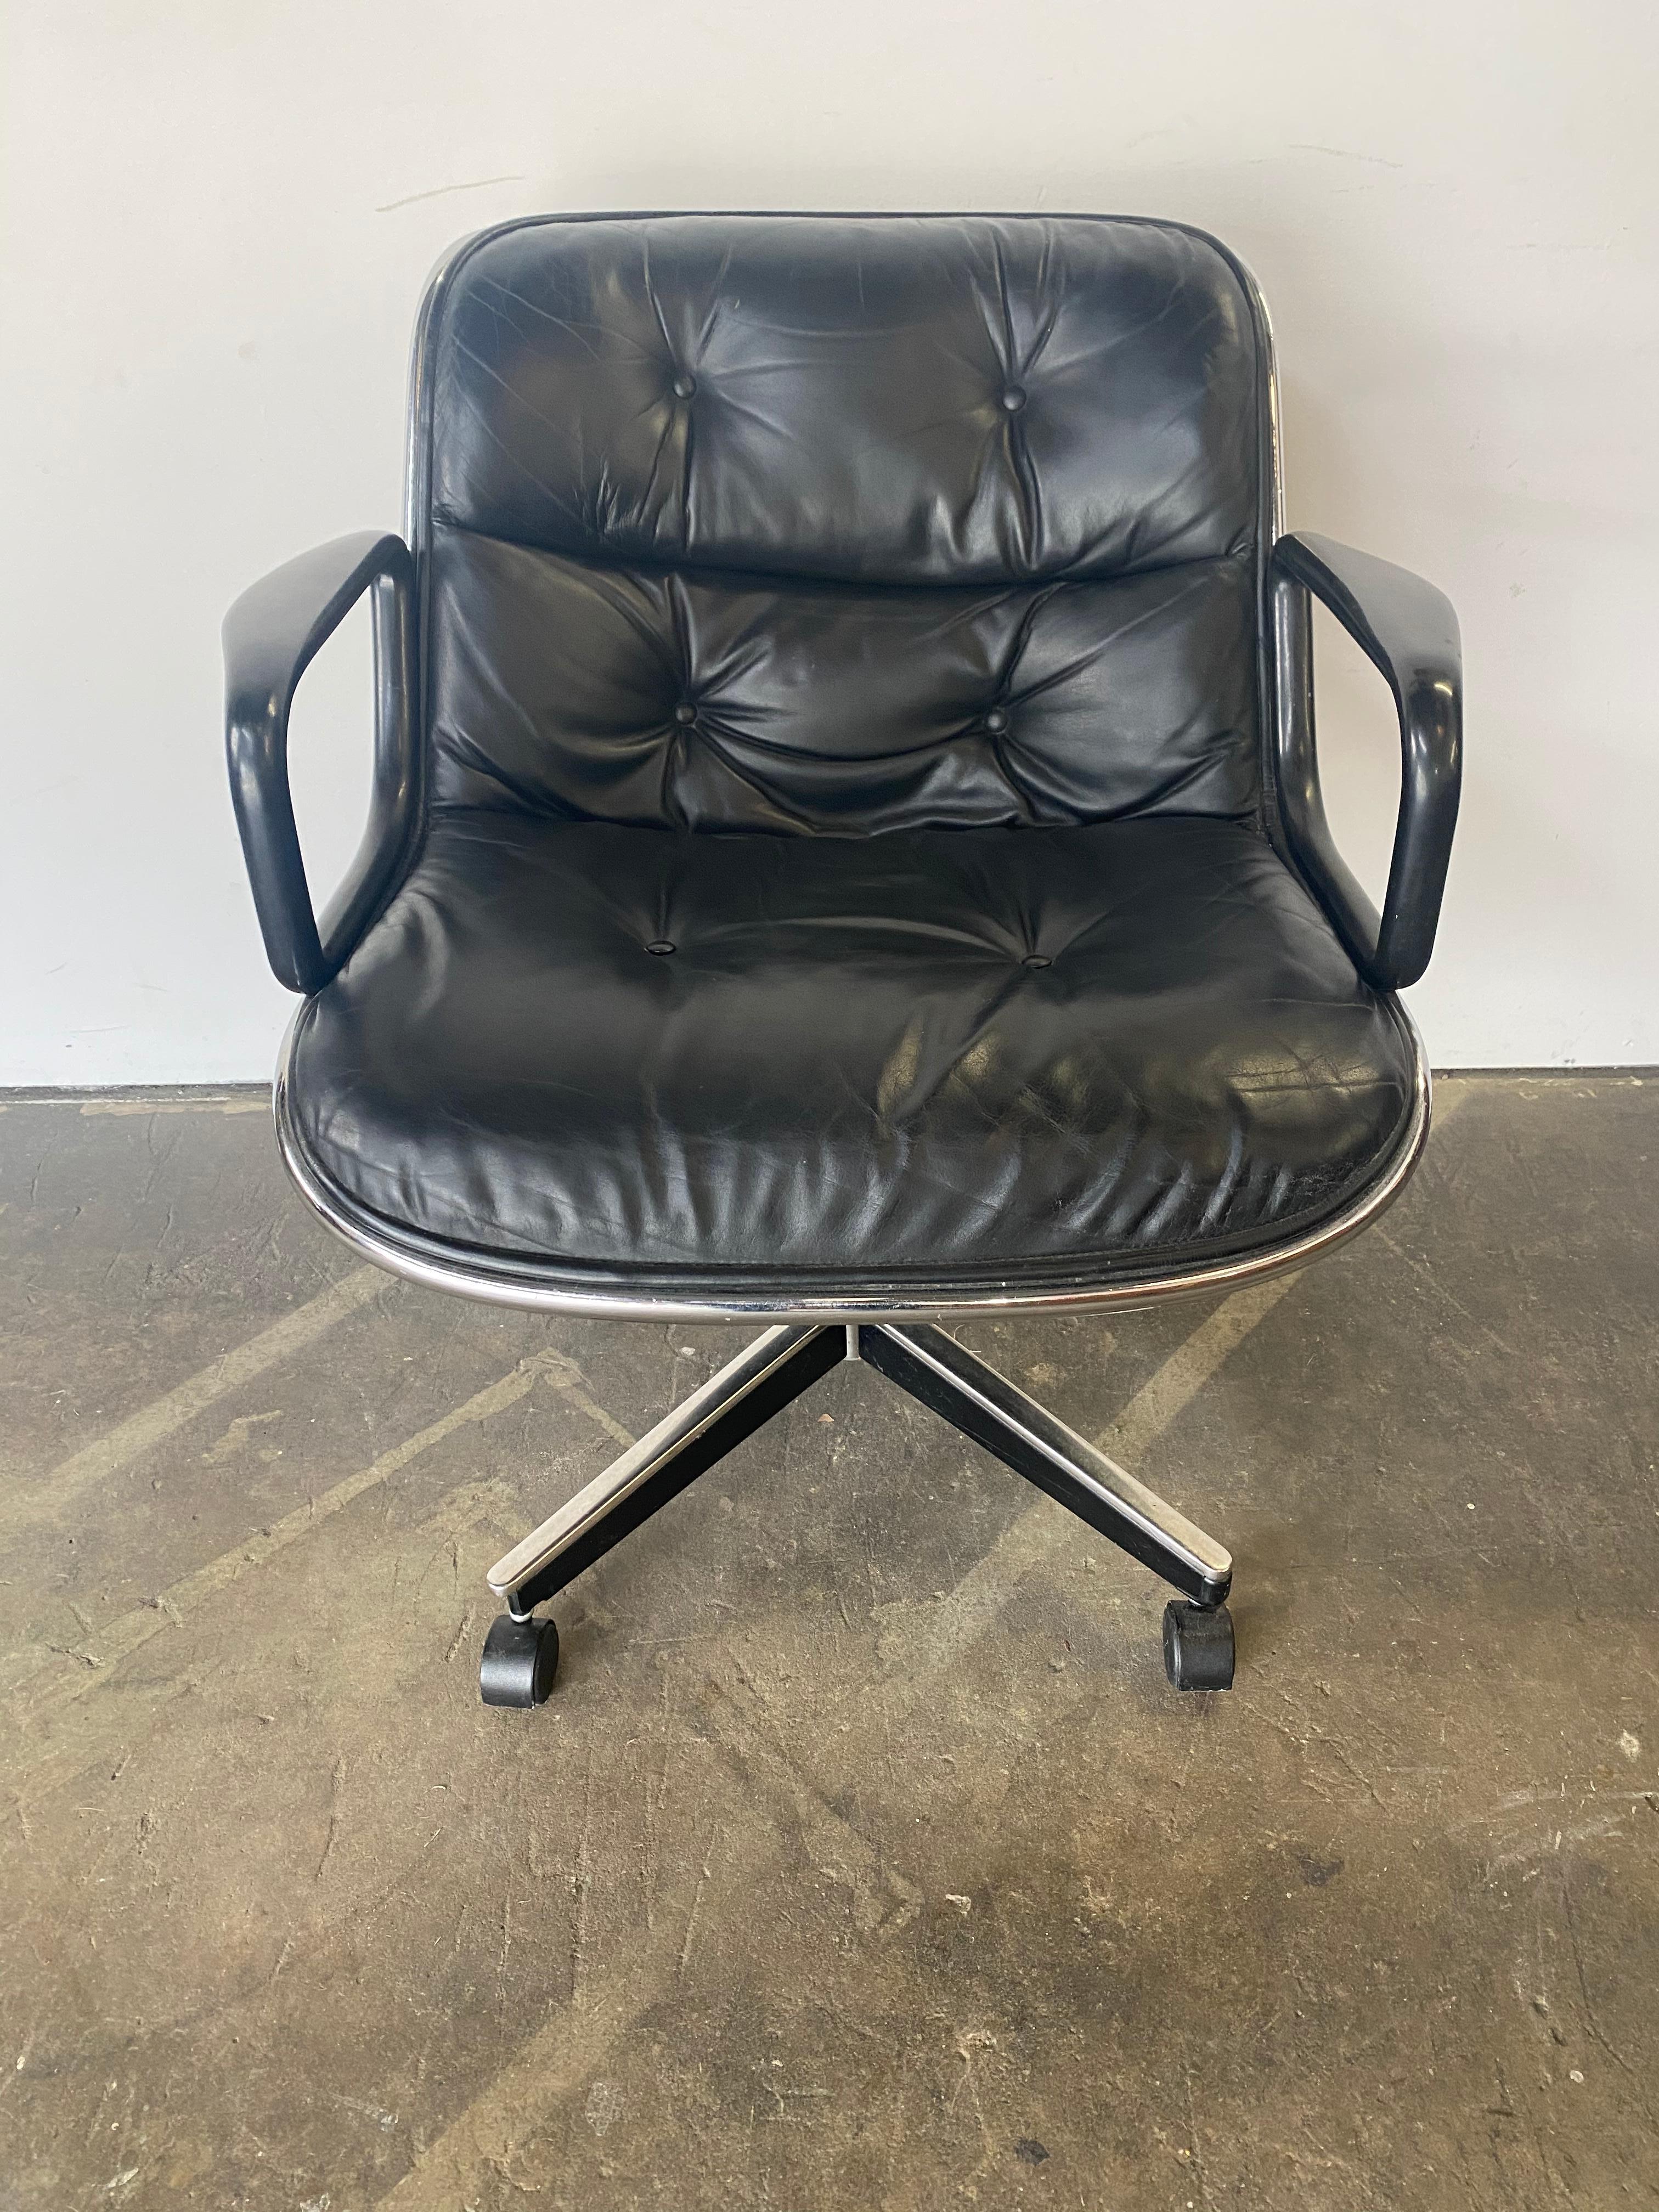 Vintage leather desk for office chair by Charles Pollock for Knoll. In good vintage condition. All wheels work as does swivel base. Original leather in good condition. Extremely comfortable and can be seen in countless shows and movies as an